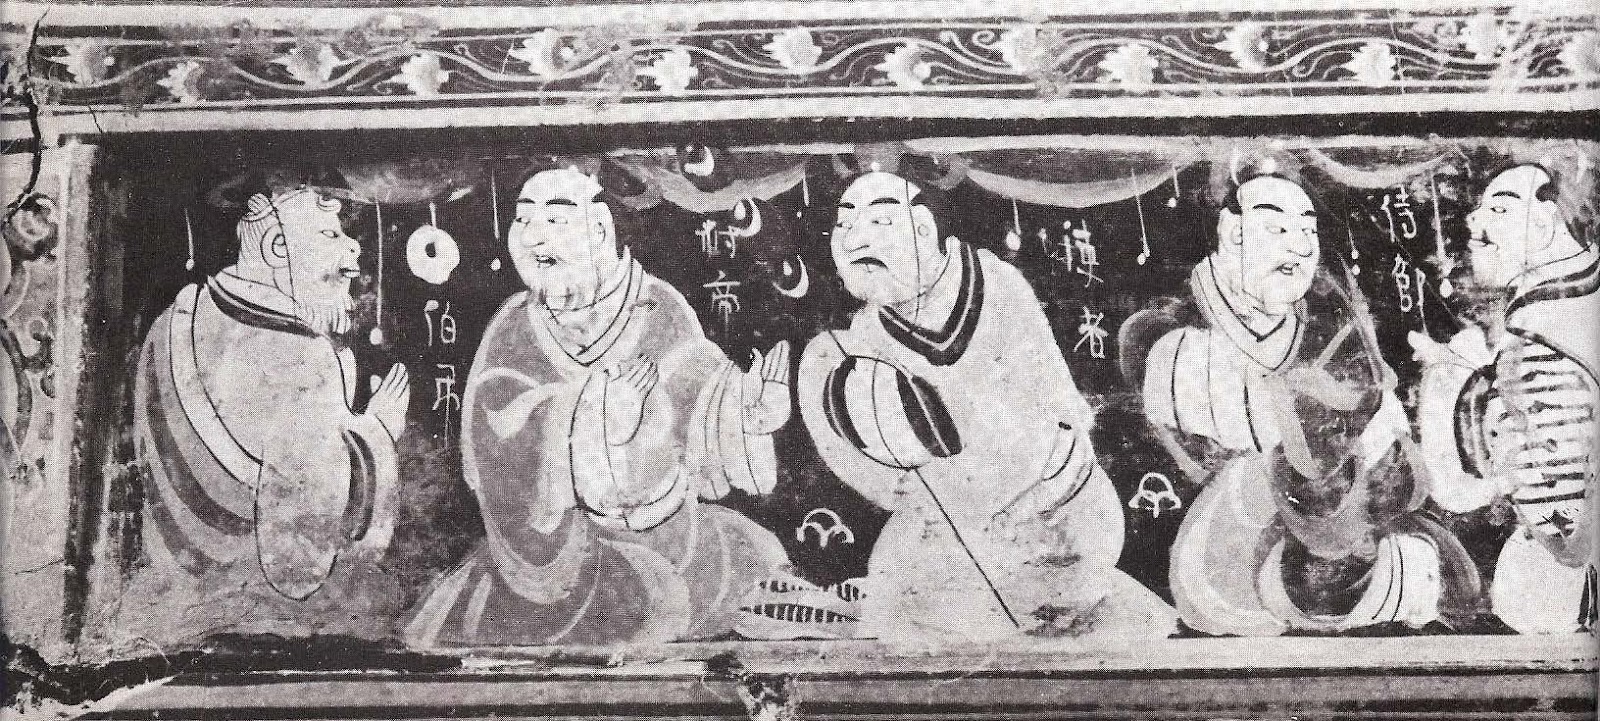 Painting depicting paragons of filial piety on a box excavated from a Han Dynasty tomb